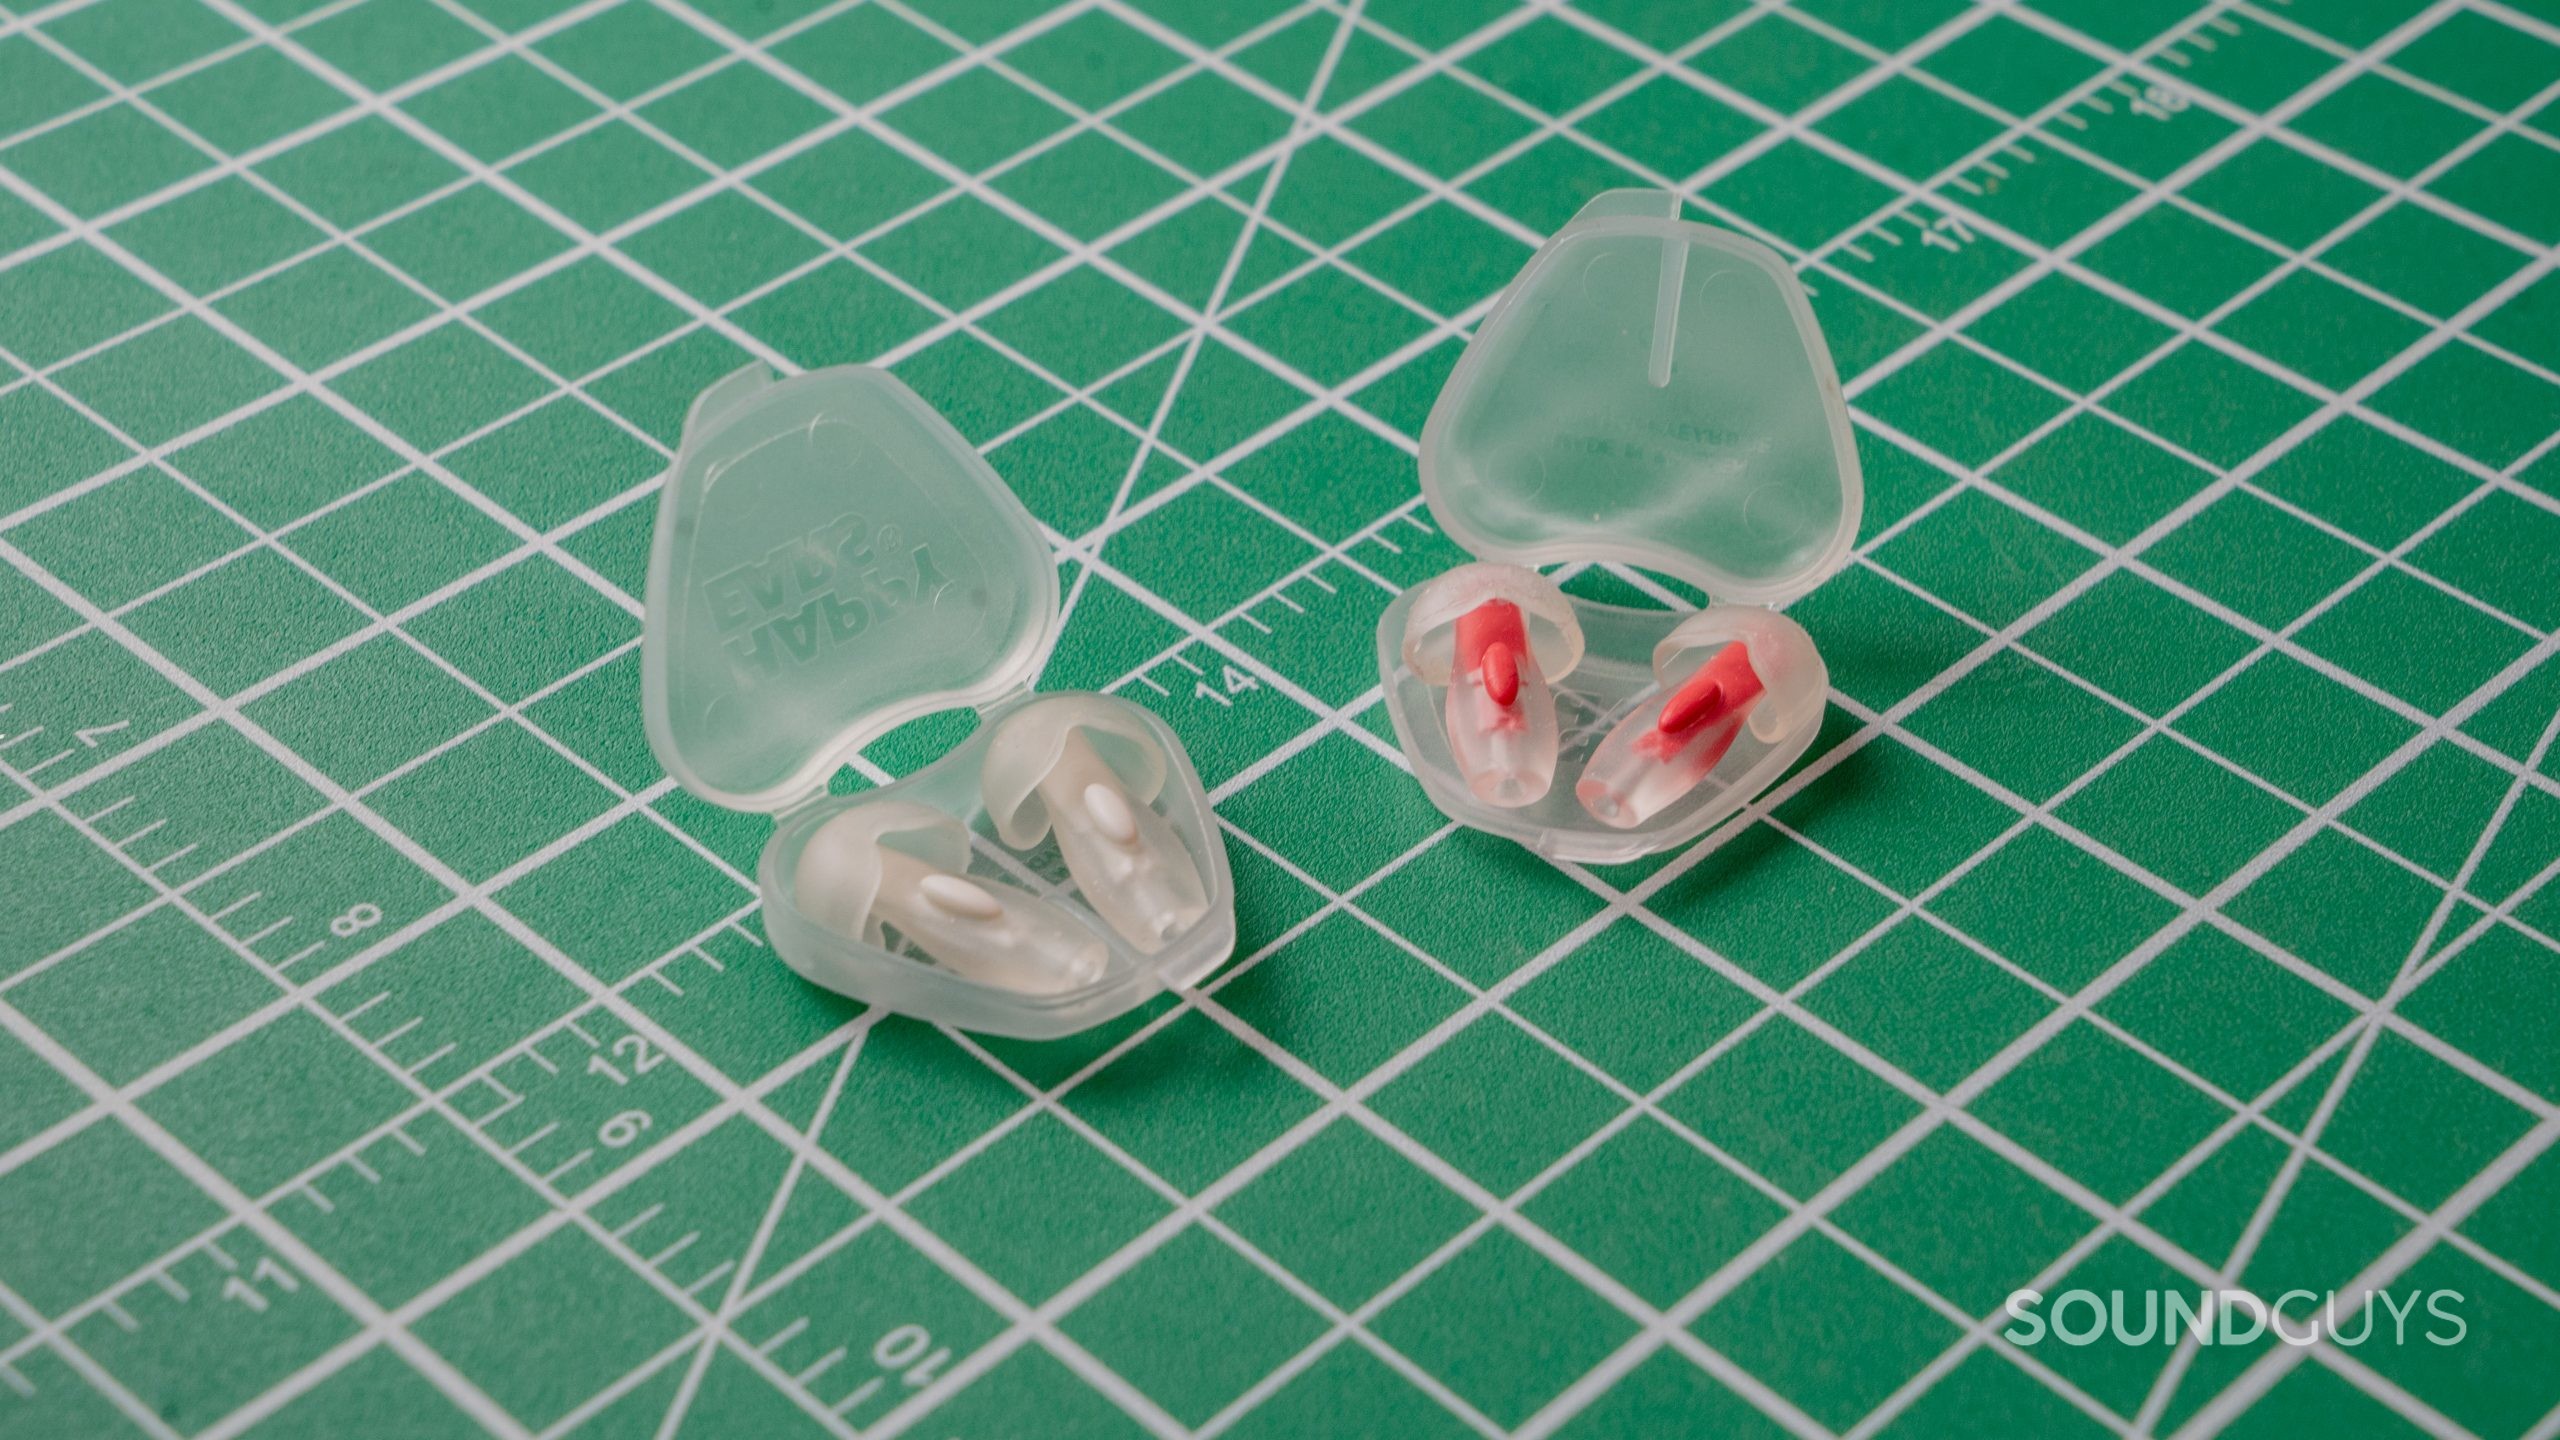 Happy Ears earplugs in 2 sizes against a white on green grid background.